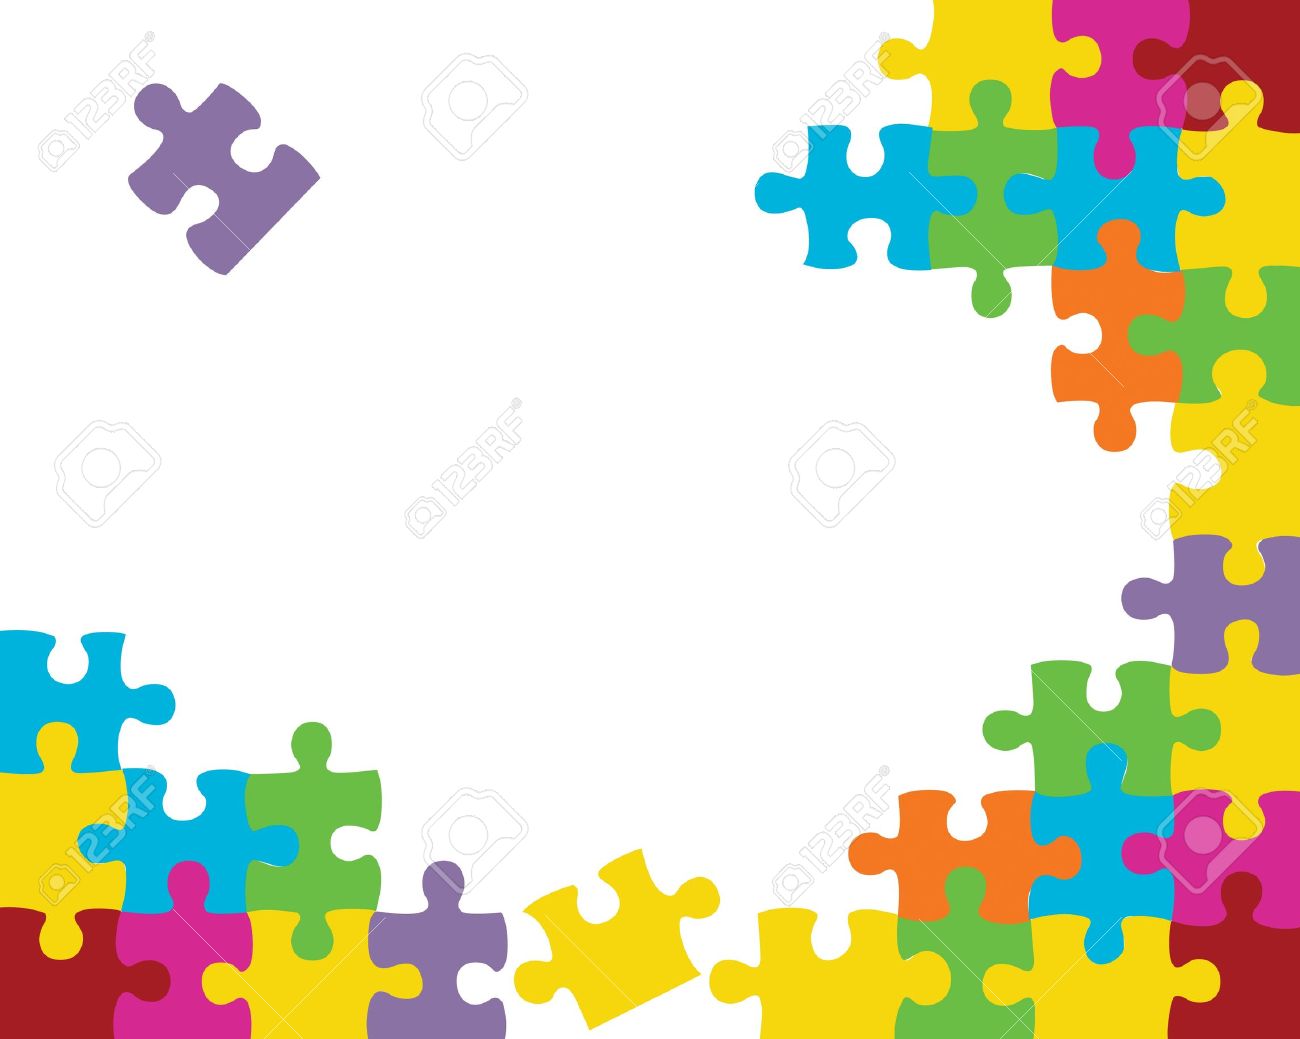 Abstract Jigsaw Puzzle Background Illustration Royalty